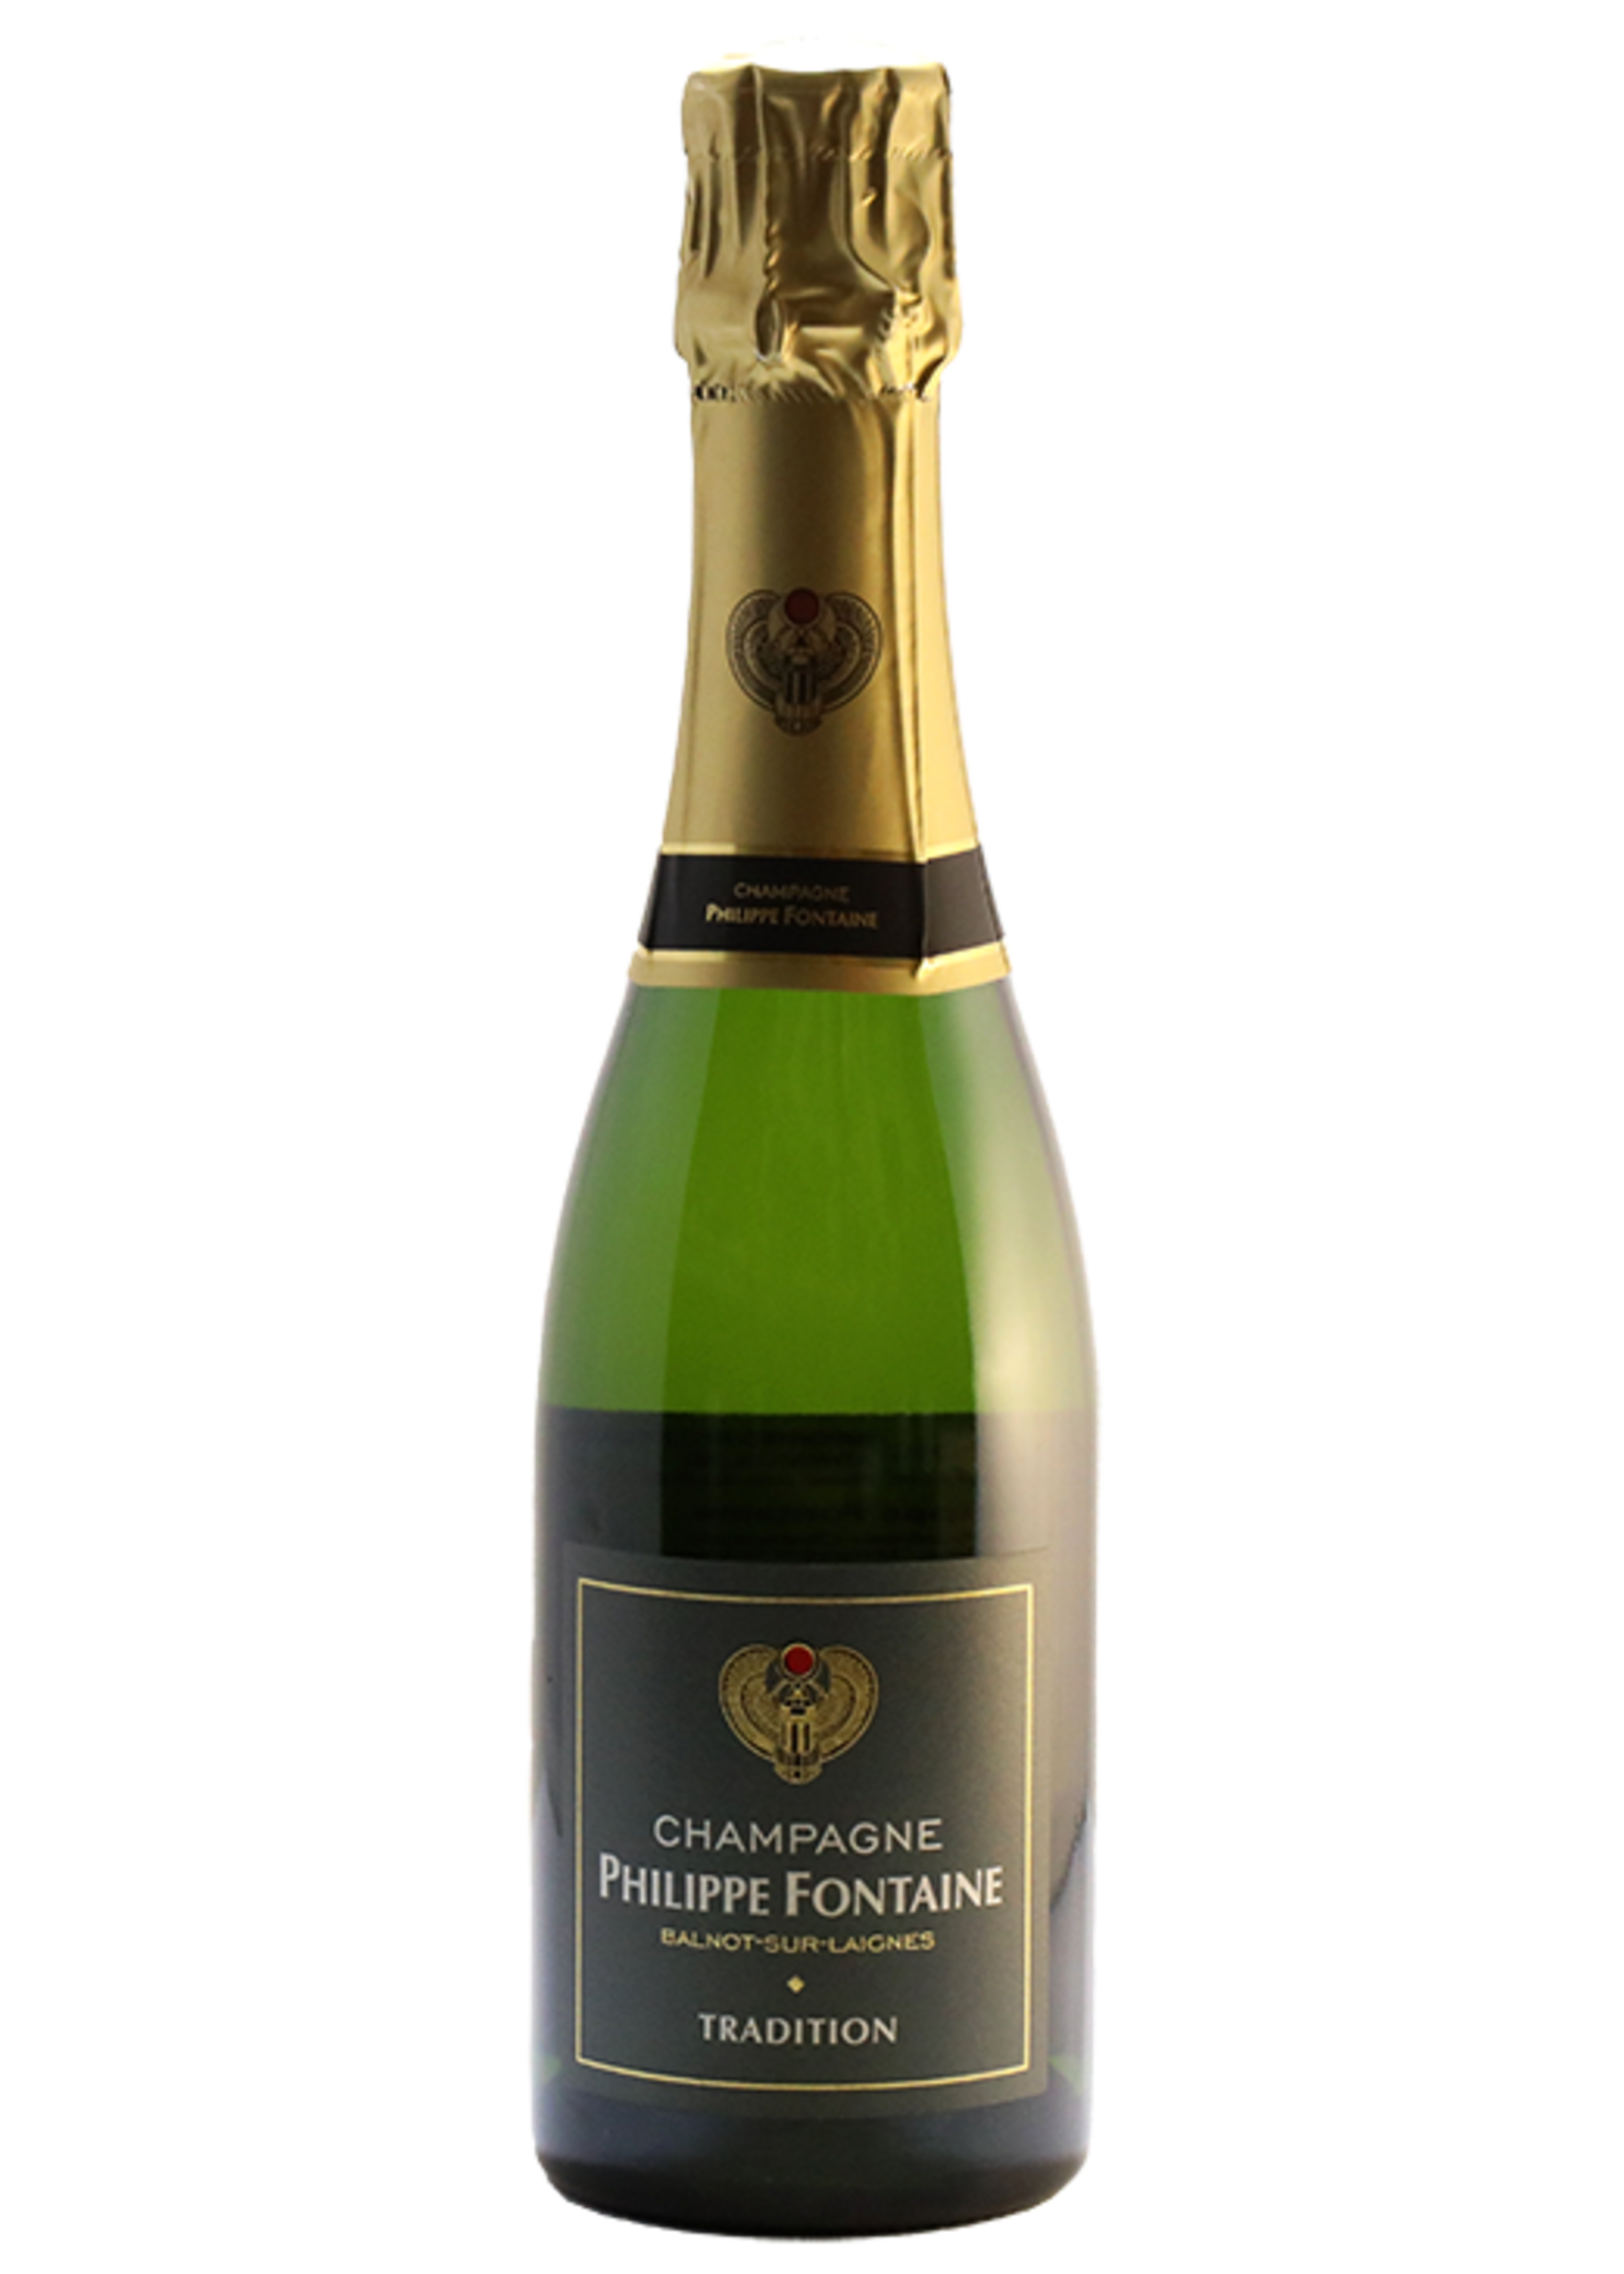 Champagne Brut "Tradition" NV Philippe Fontaine (375 ml)